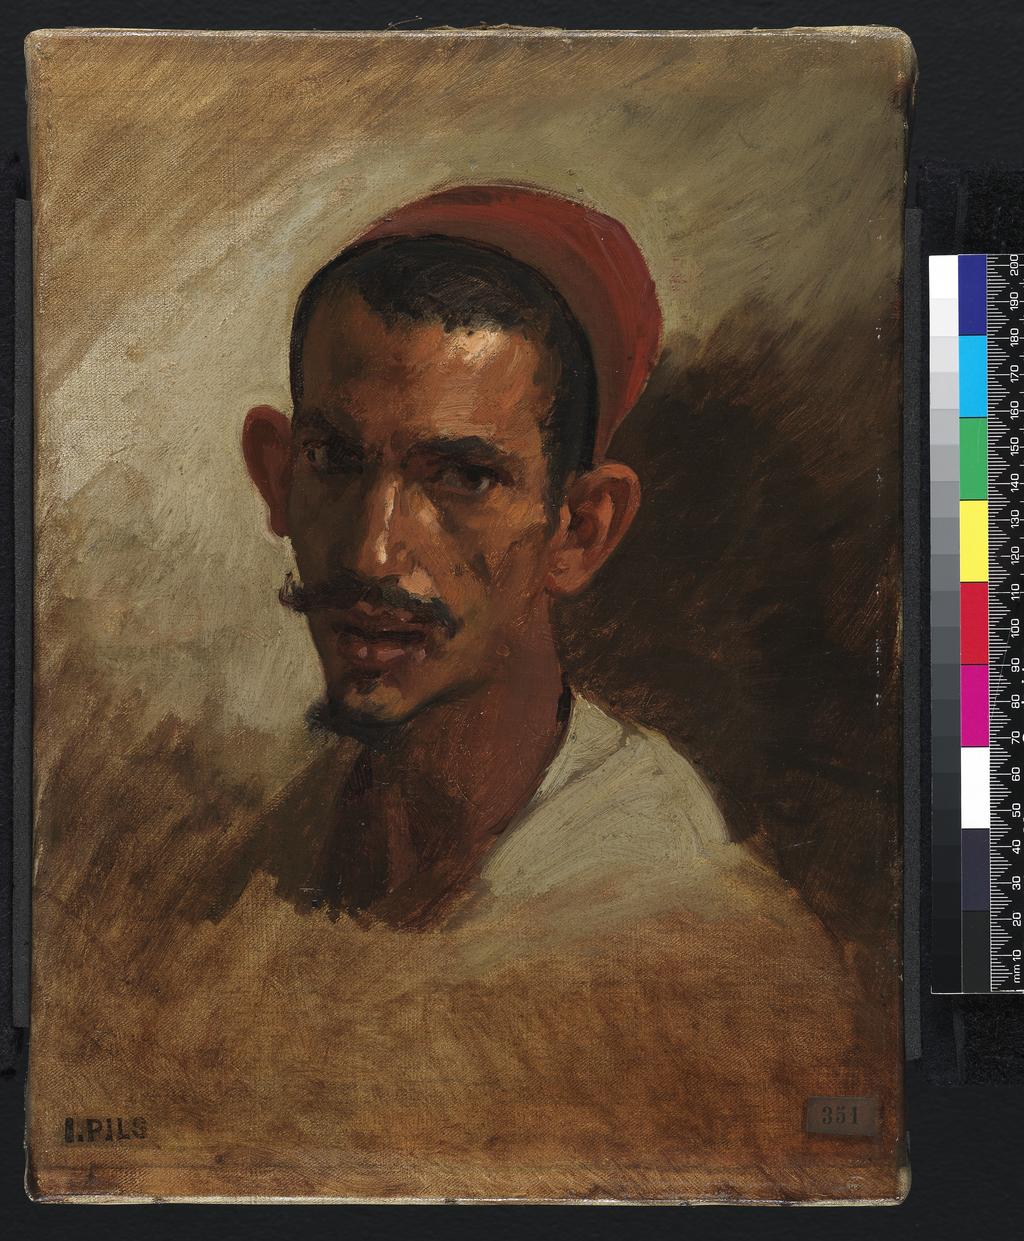 An image of Study for the head of a young Arab. Pils, Isidore Alexandre Augustin (French, 1813/15-1875). Oil on canvas, height 33 cm, width 24 cm, circa 1860-1862. Production Note: This is a study for one of the figures in Pils' painting La reception des chefs arabes par Napoléon III, painted for Napoleon III to commemorate his visit to Algeria with Empress Eugénie.